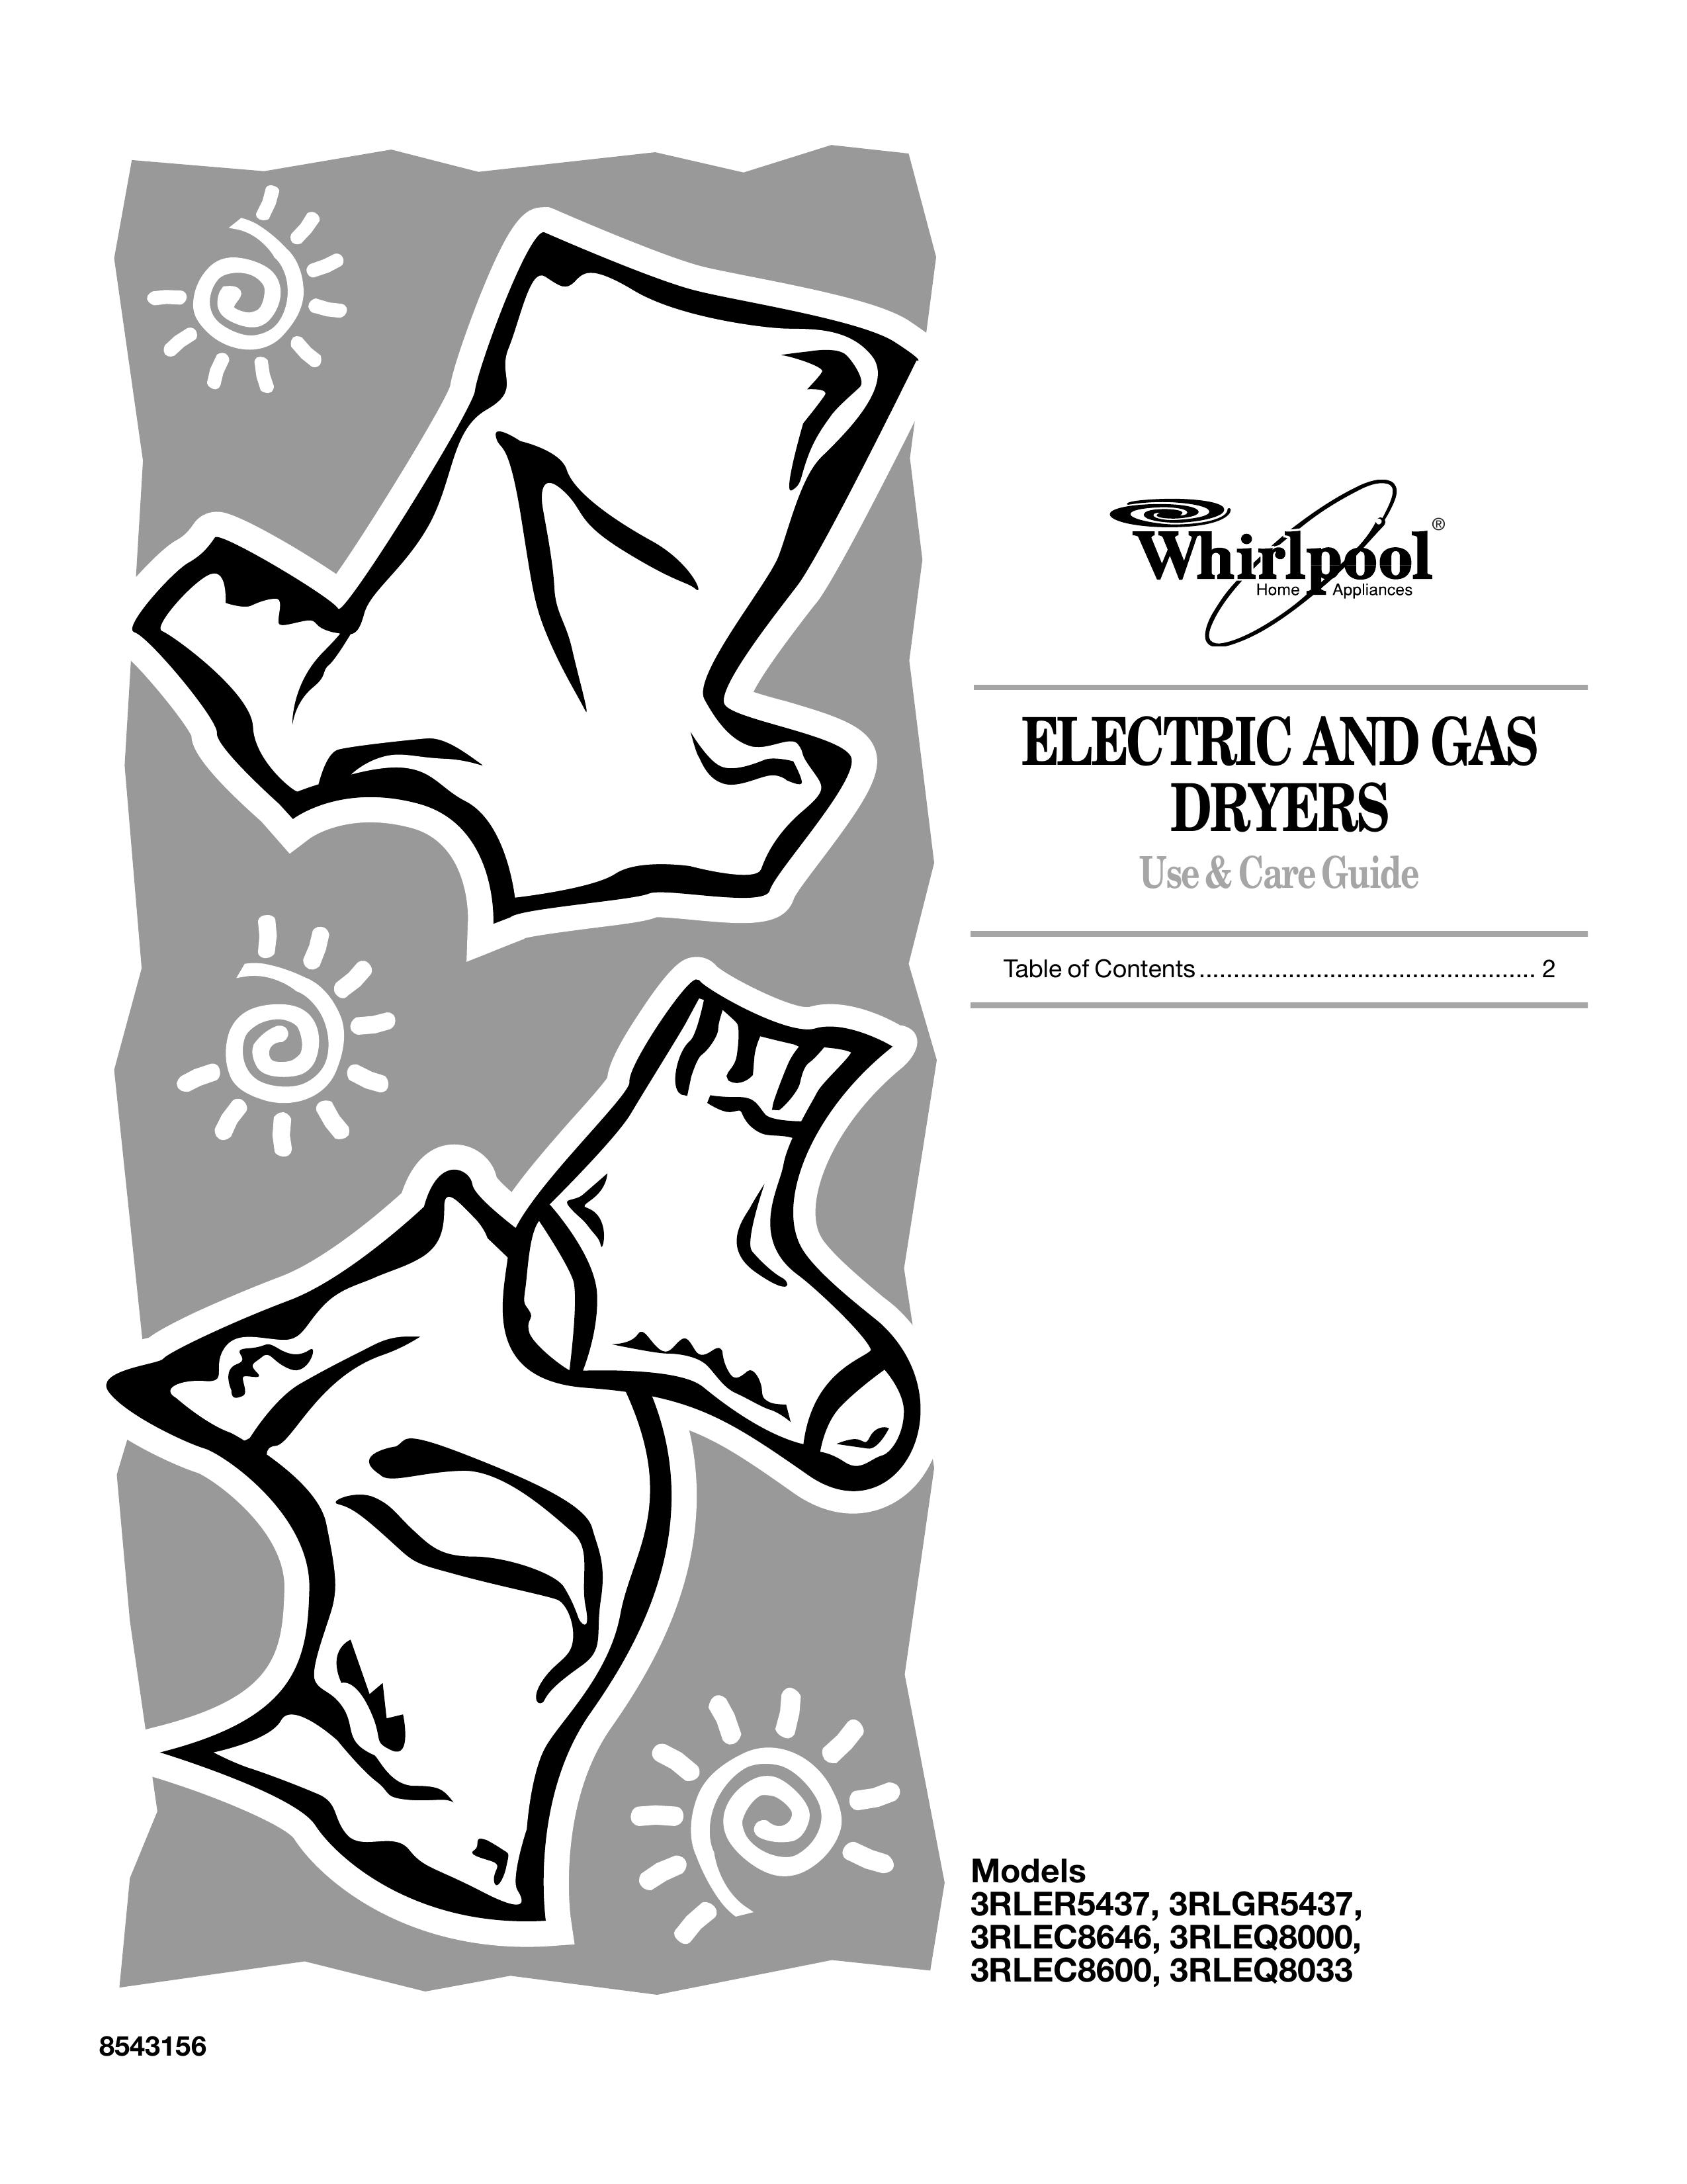 Whirlpool 3RLEC8646 Clothes Dryer User Manual